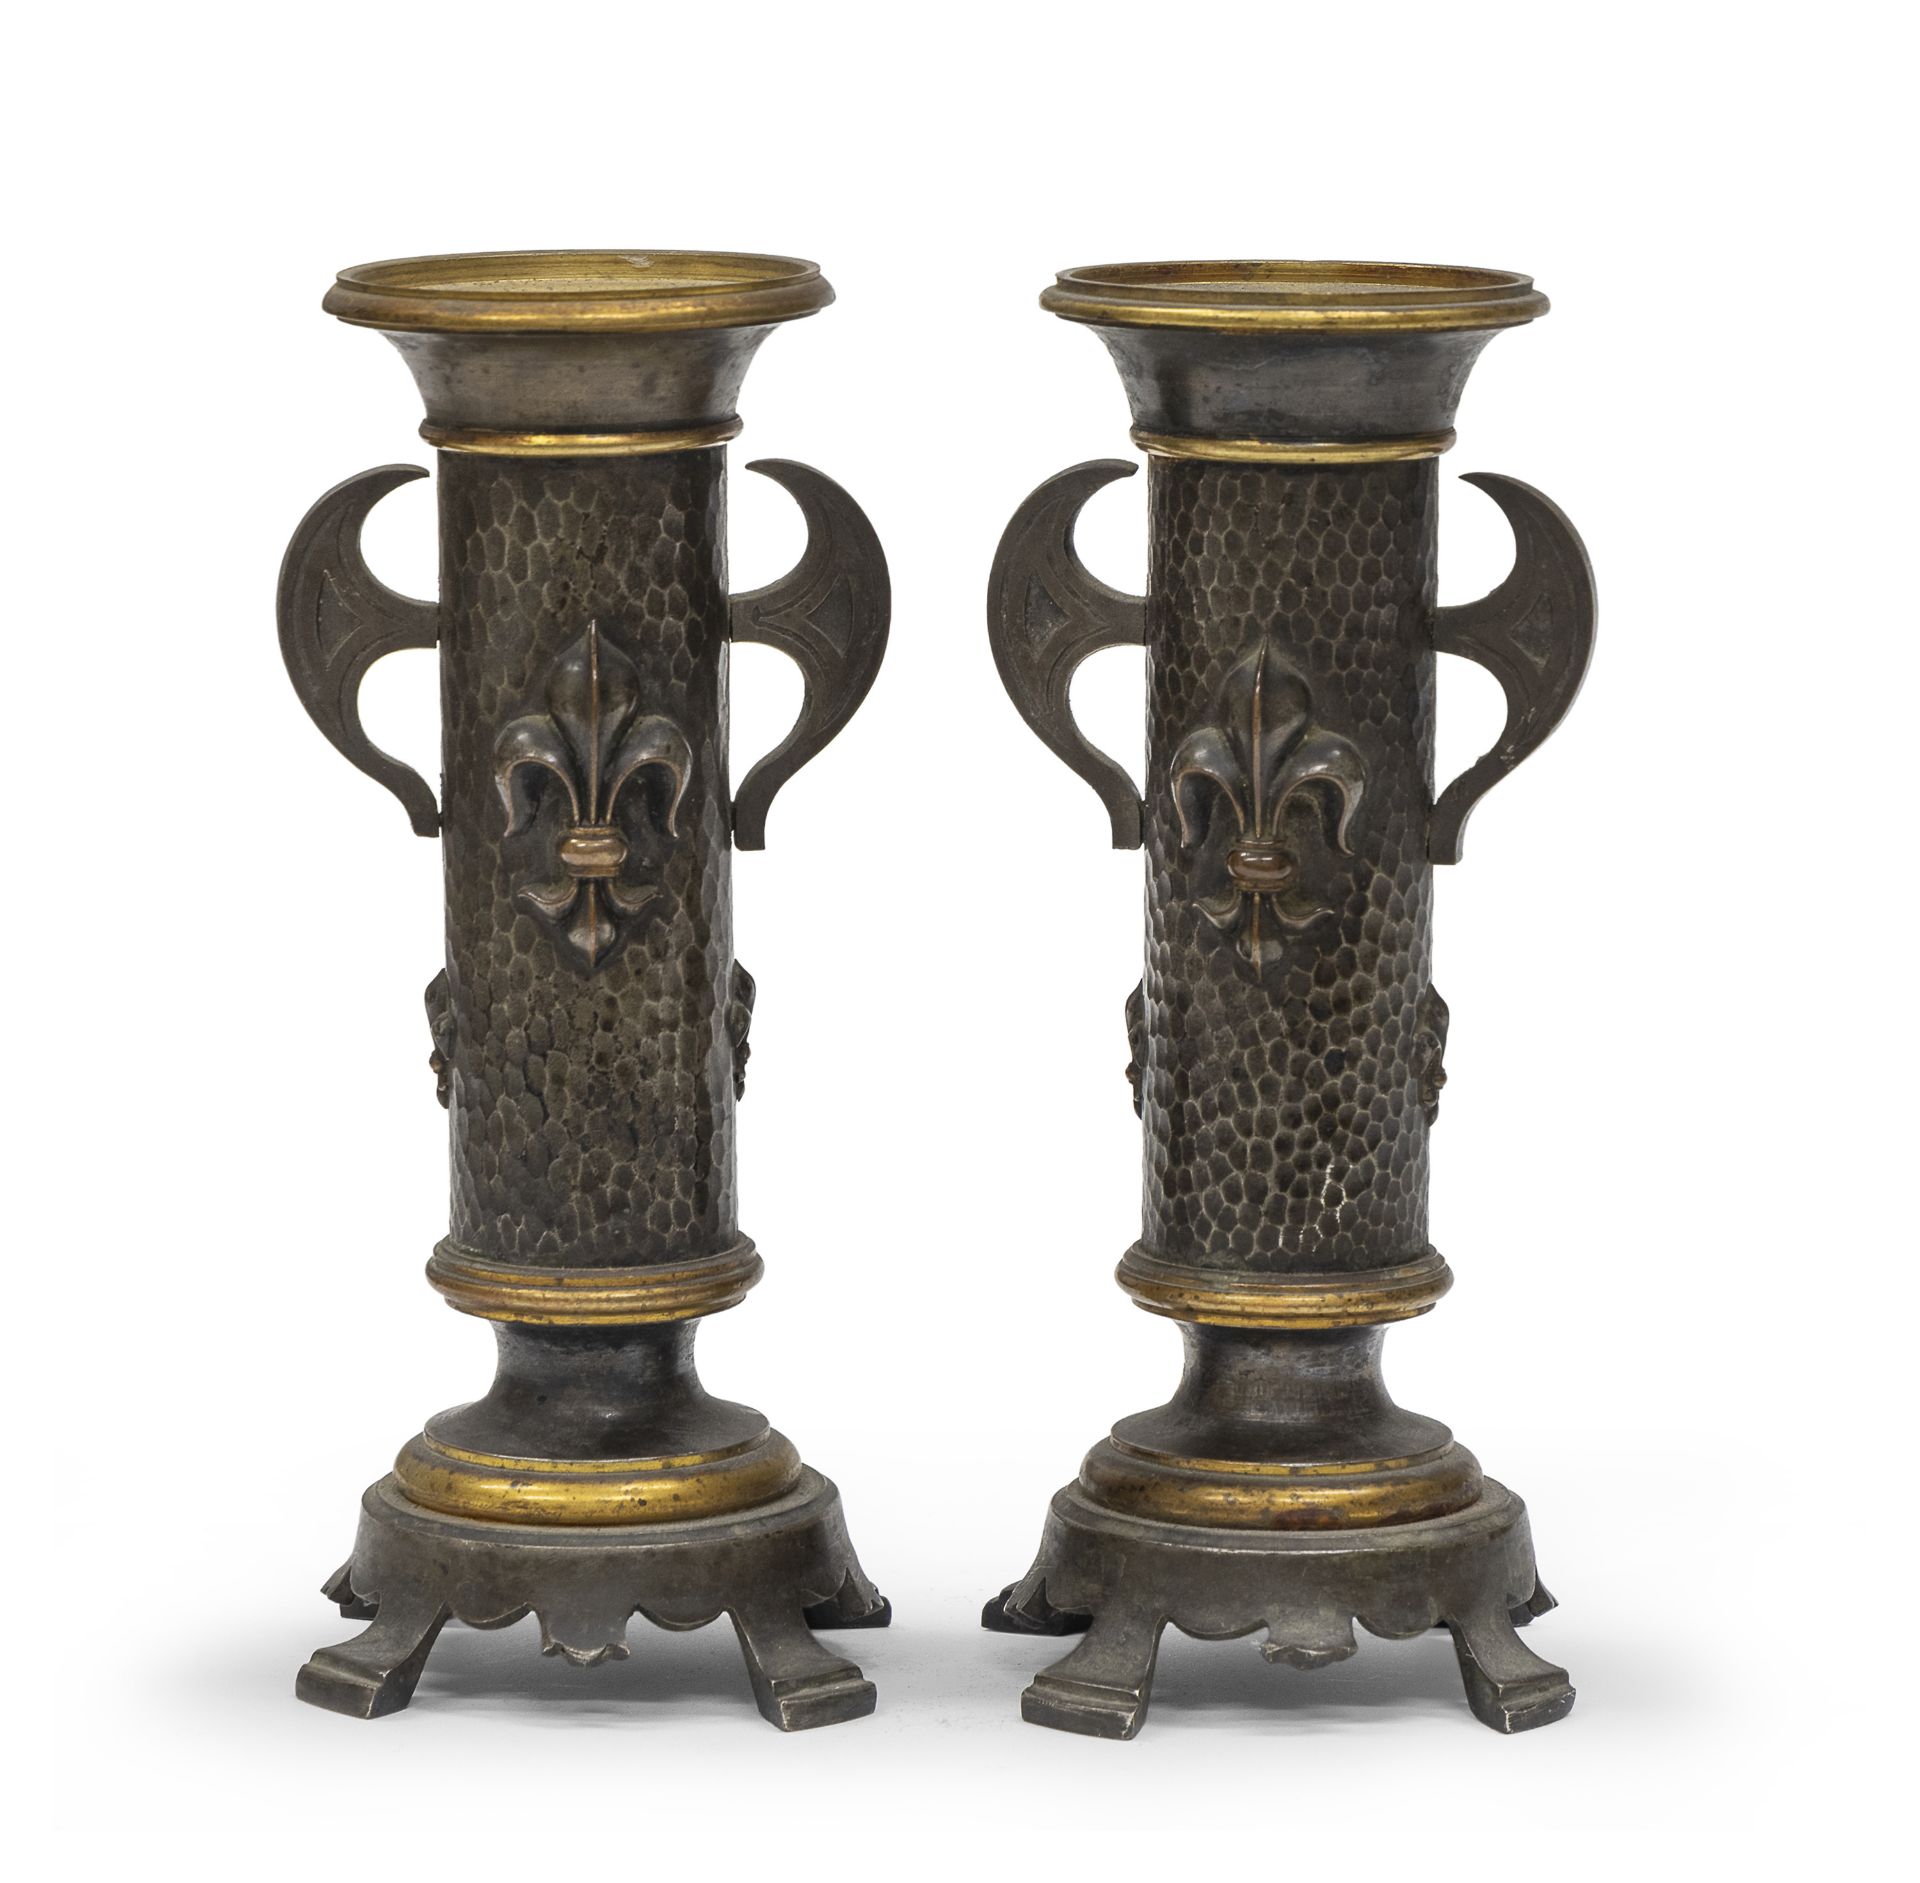 PAIR OF BURNISHED BRONZE CANDLE HOLDERS 19TH CENTURY